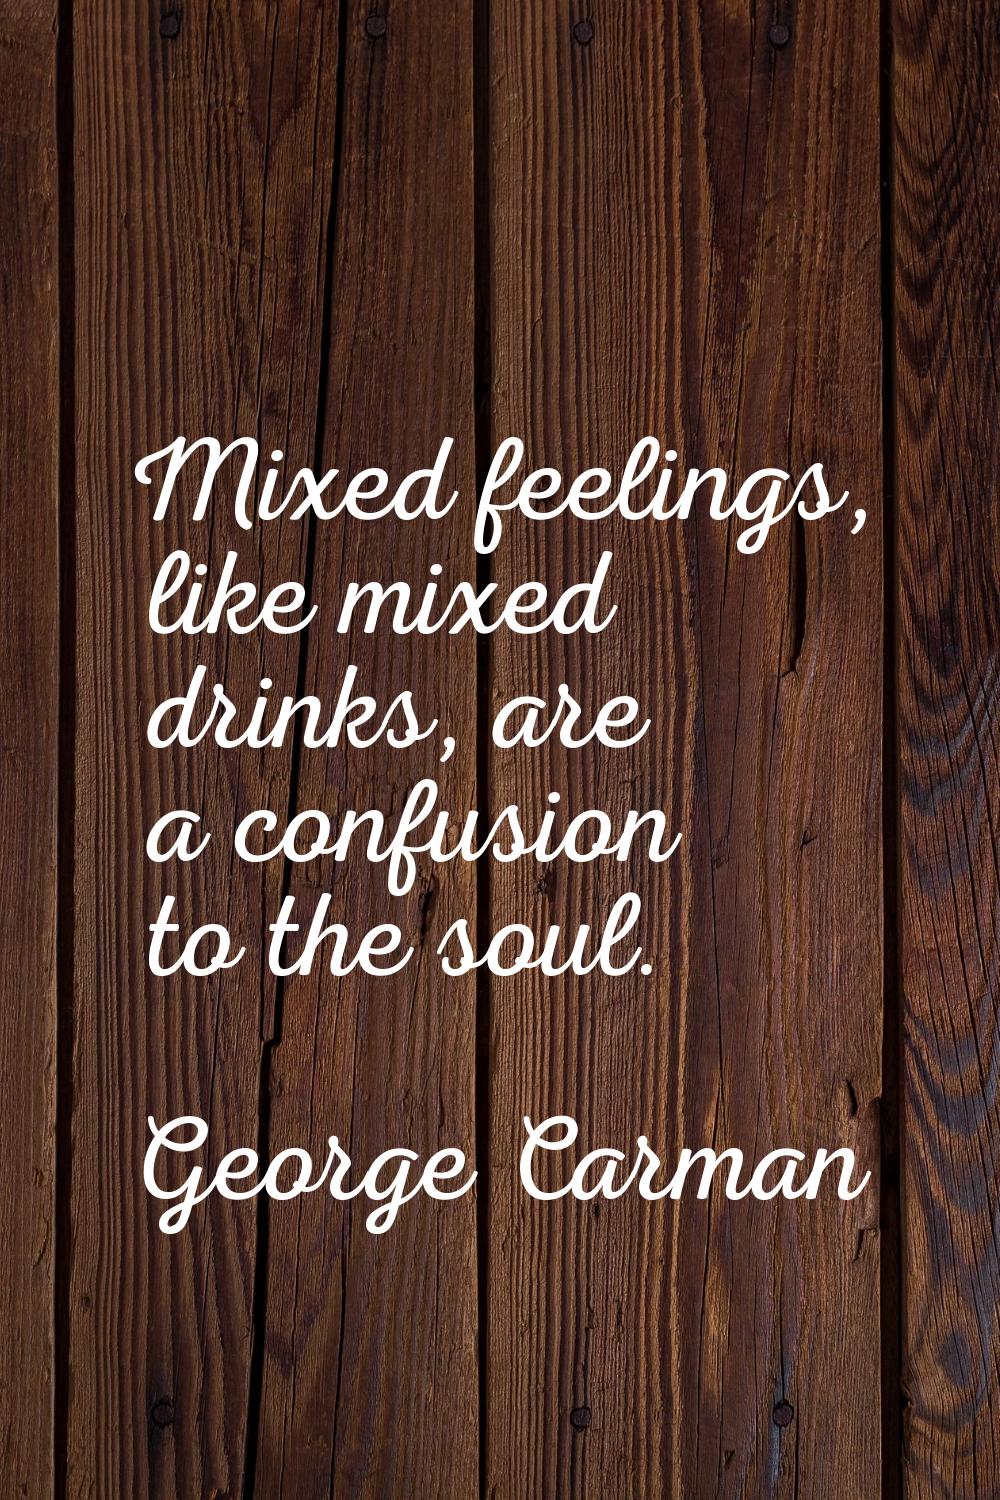 Mixed feelings, like mixed drinks, are a confusion to the soul.